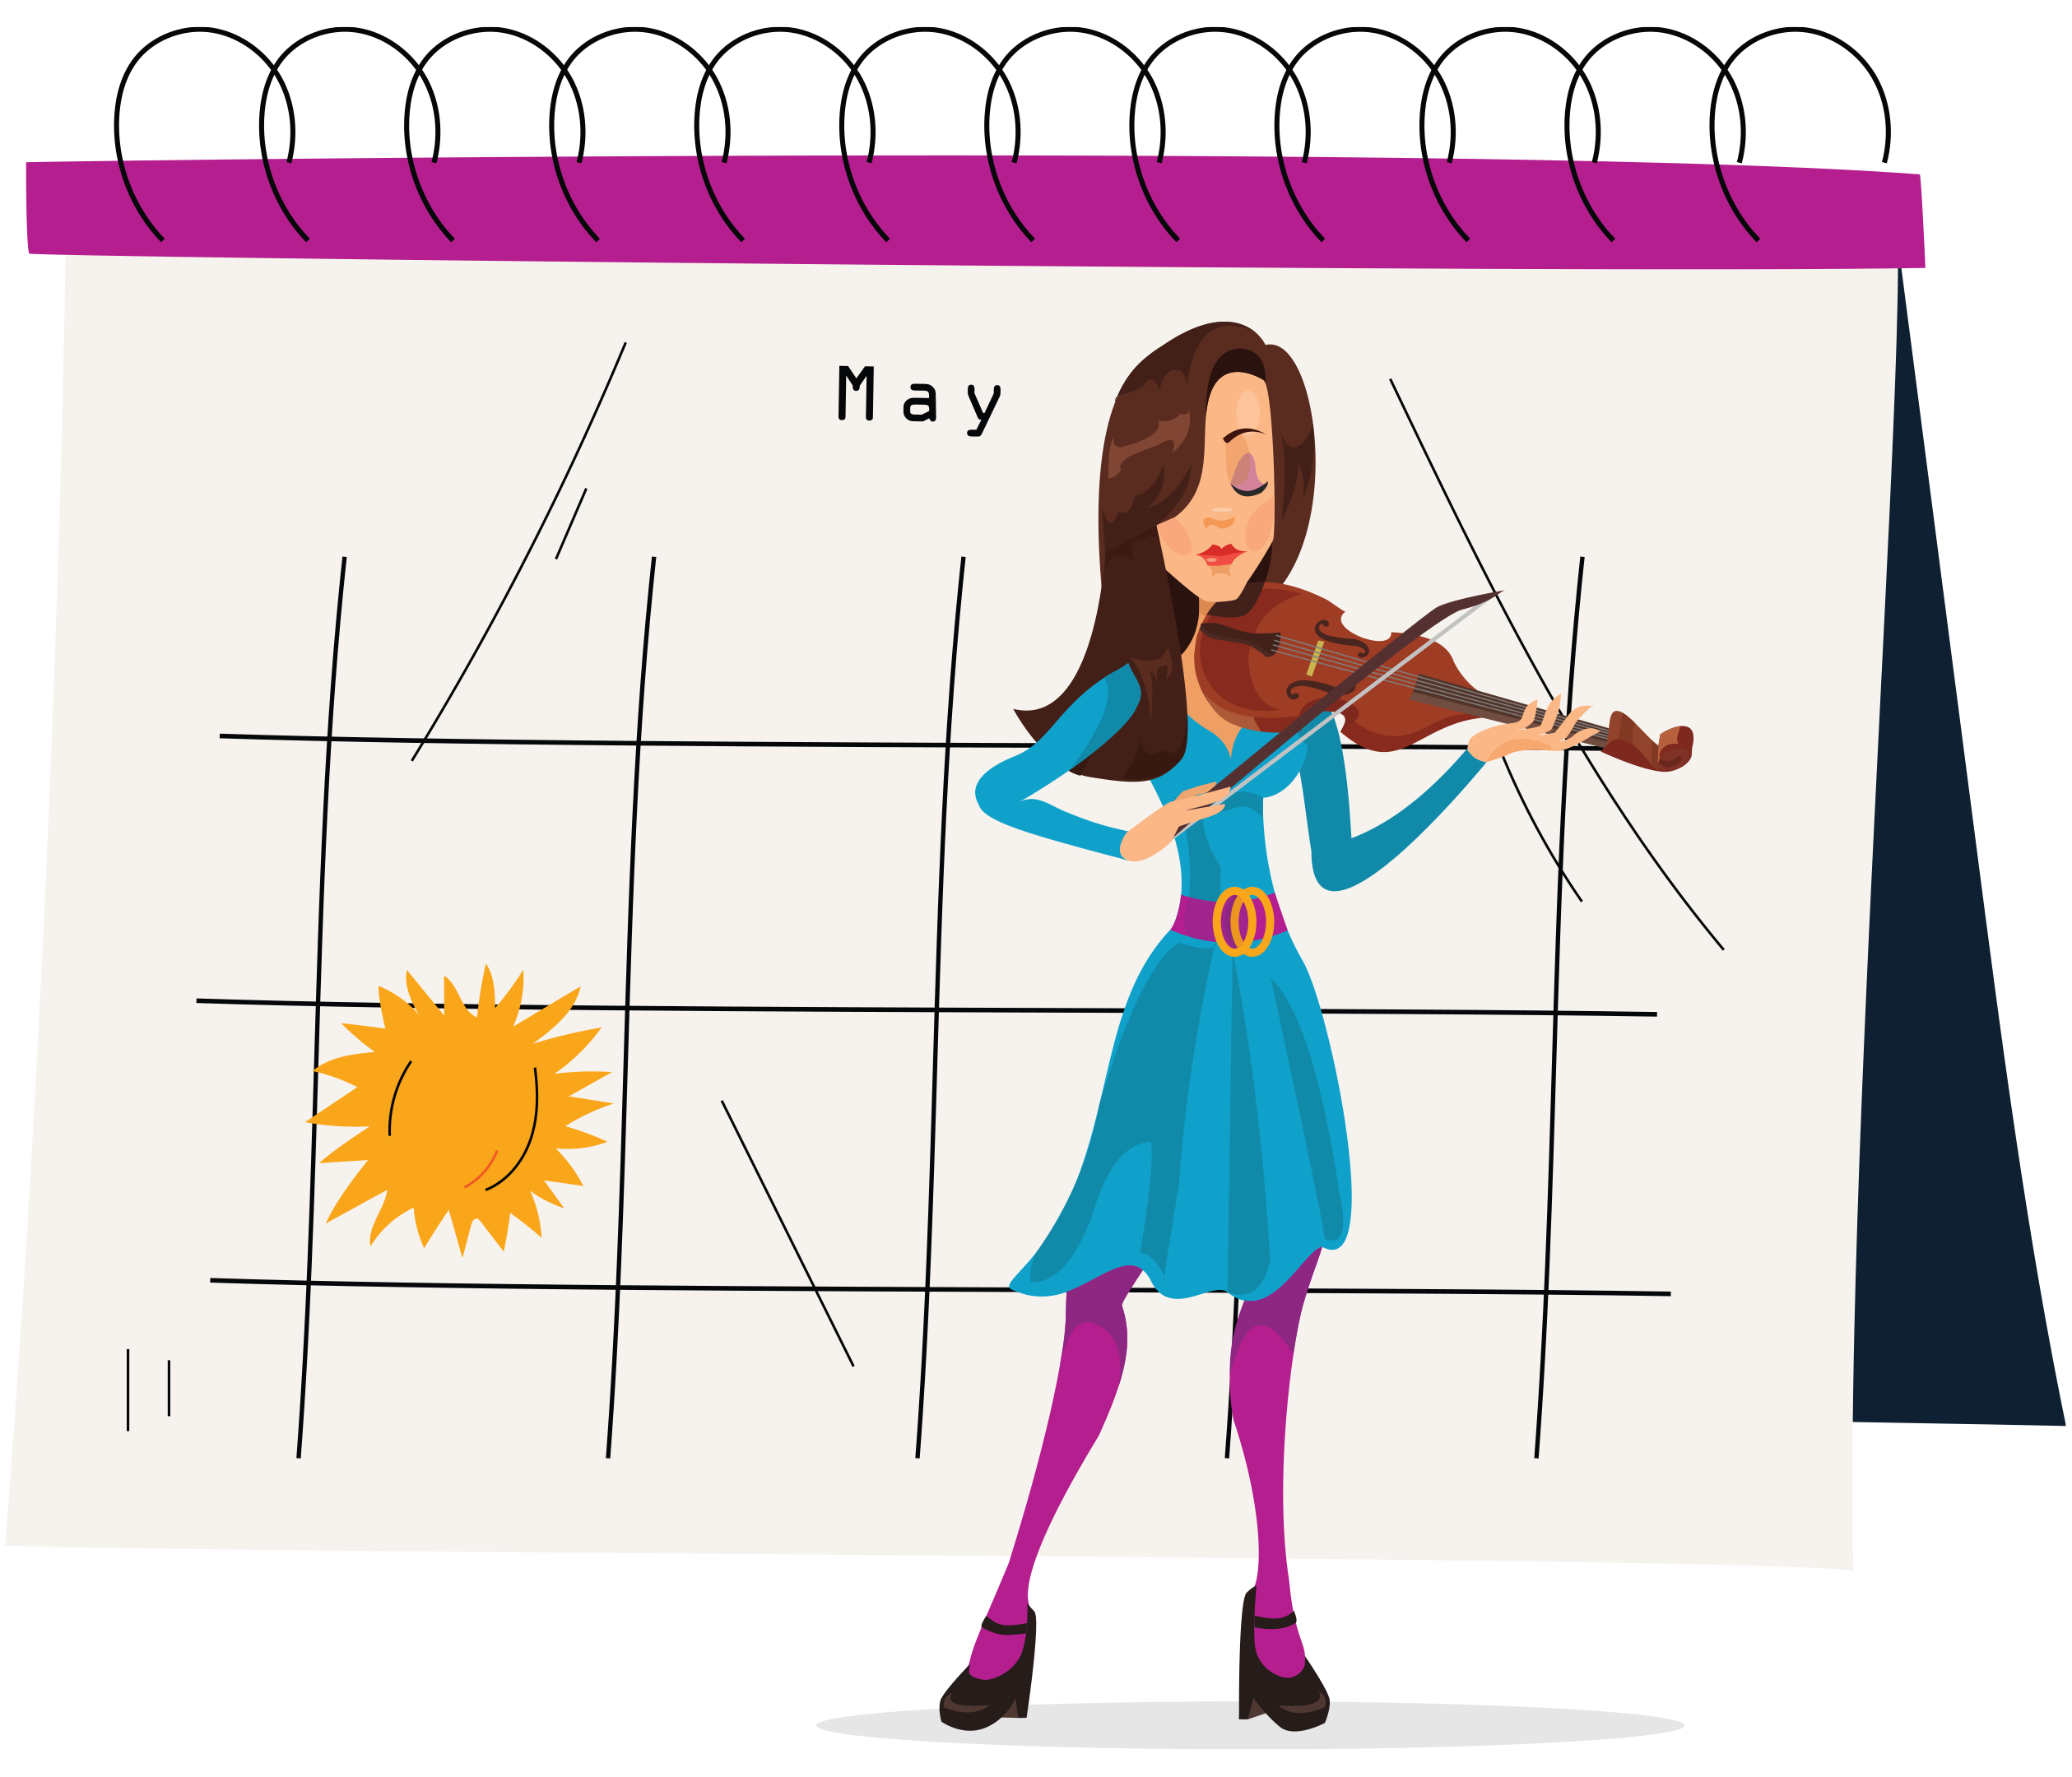 Illustration of woman playing the violin in front of an oversized desk calendar